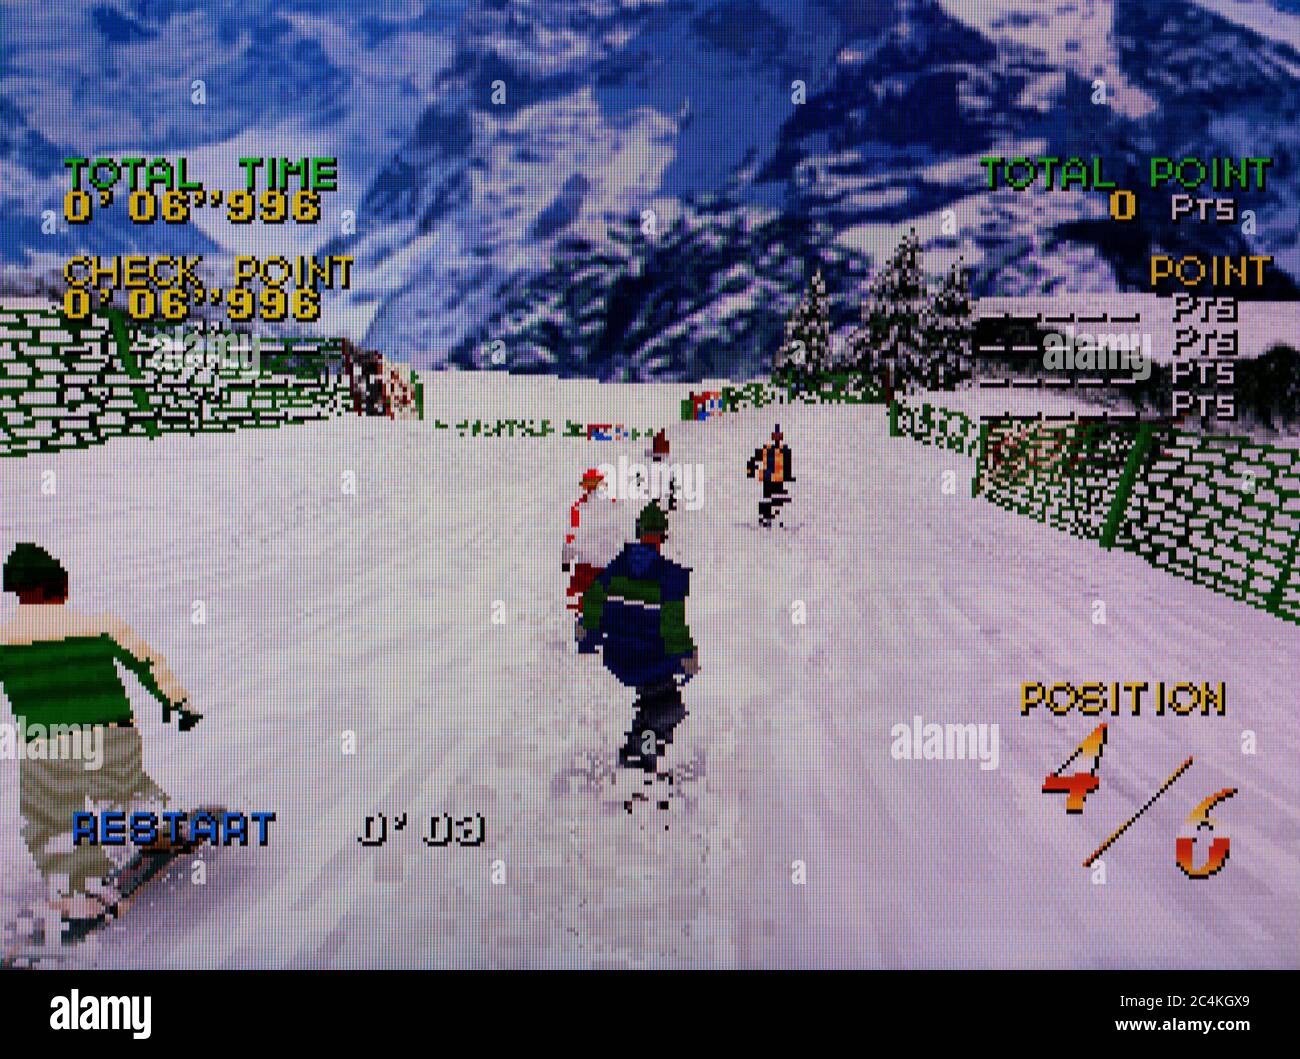 Freestyle Boardin' 99 - Sony Playstation 1 PS1 PSX - Editorial use only Stock Photo